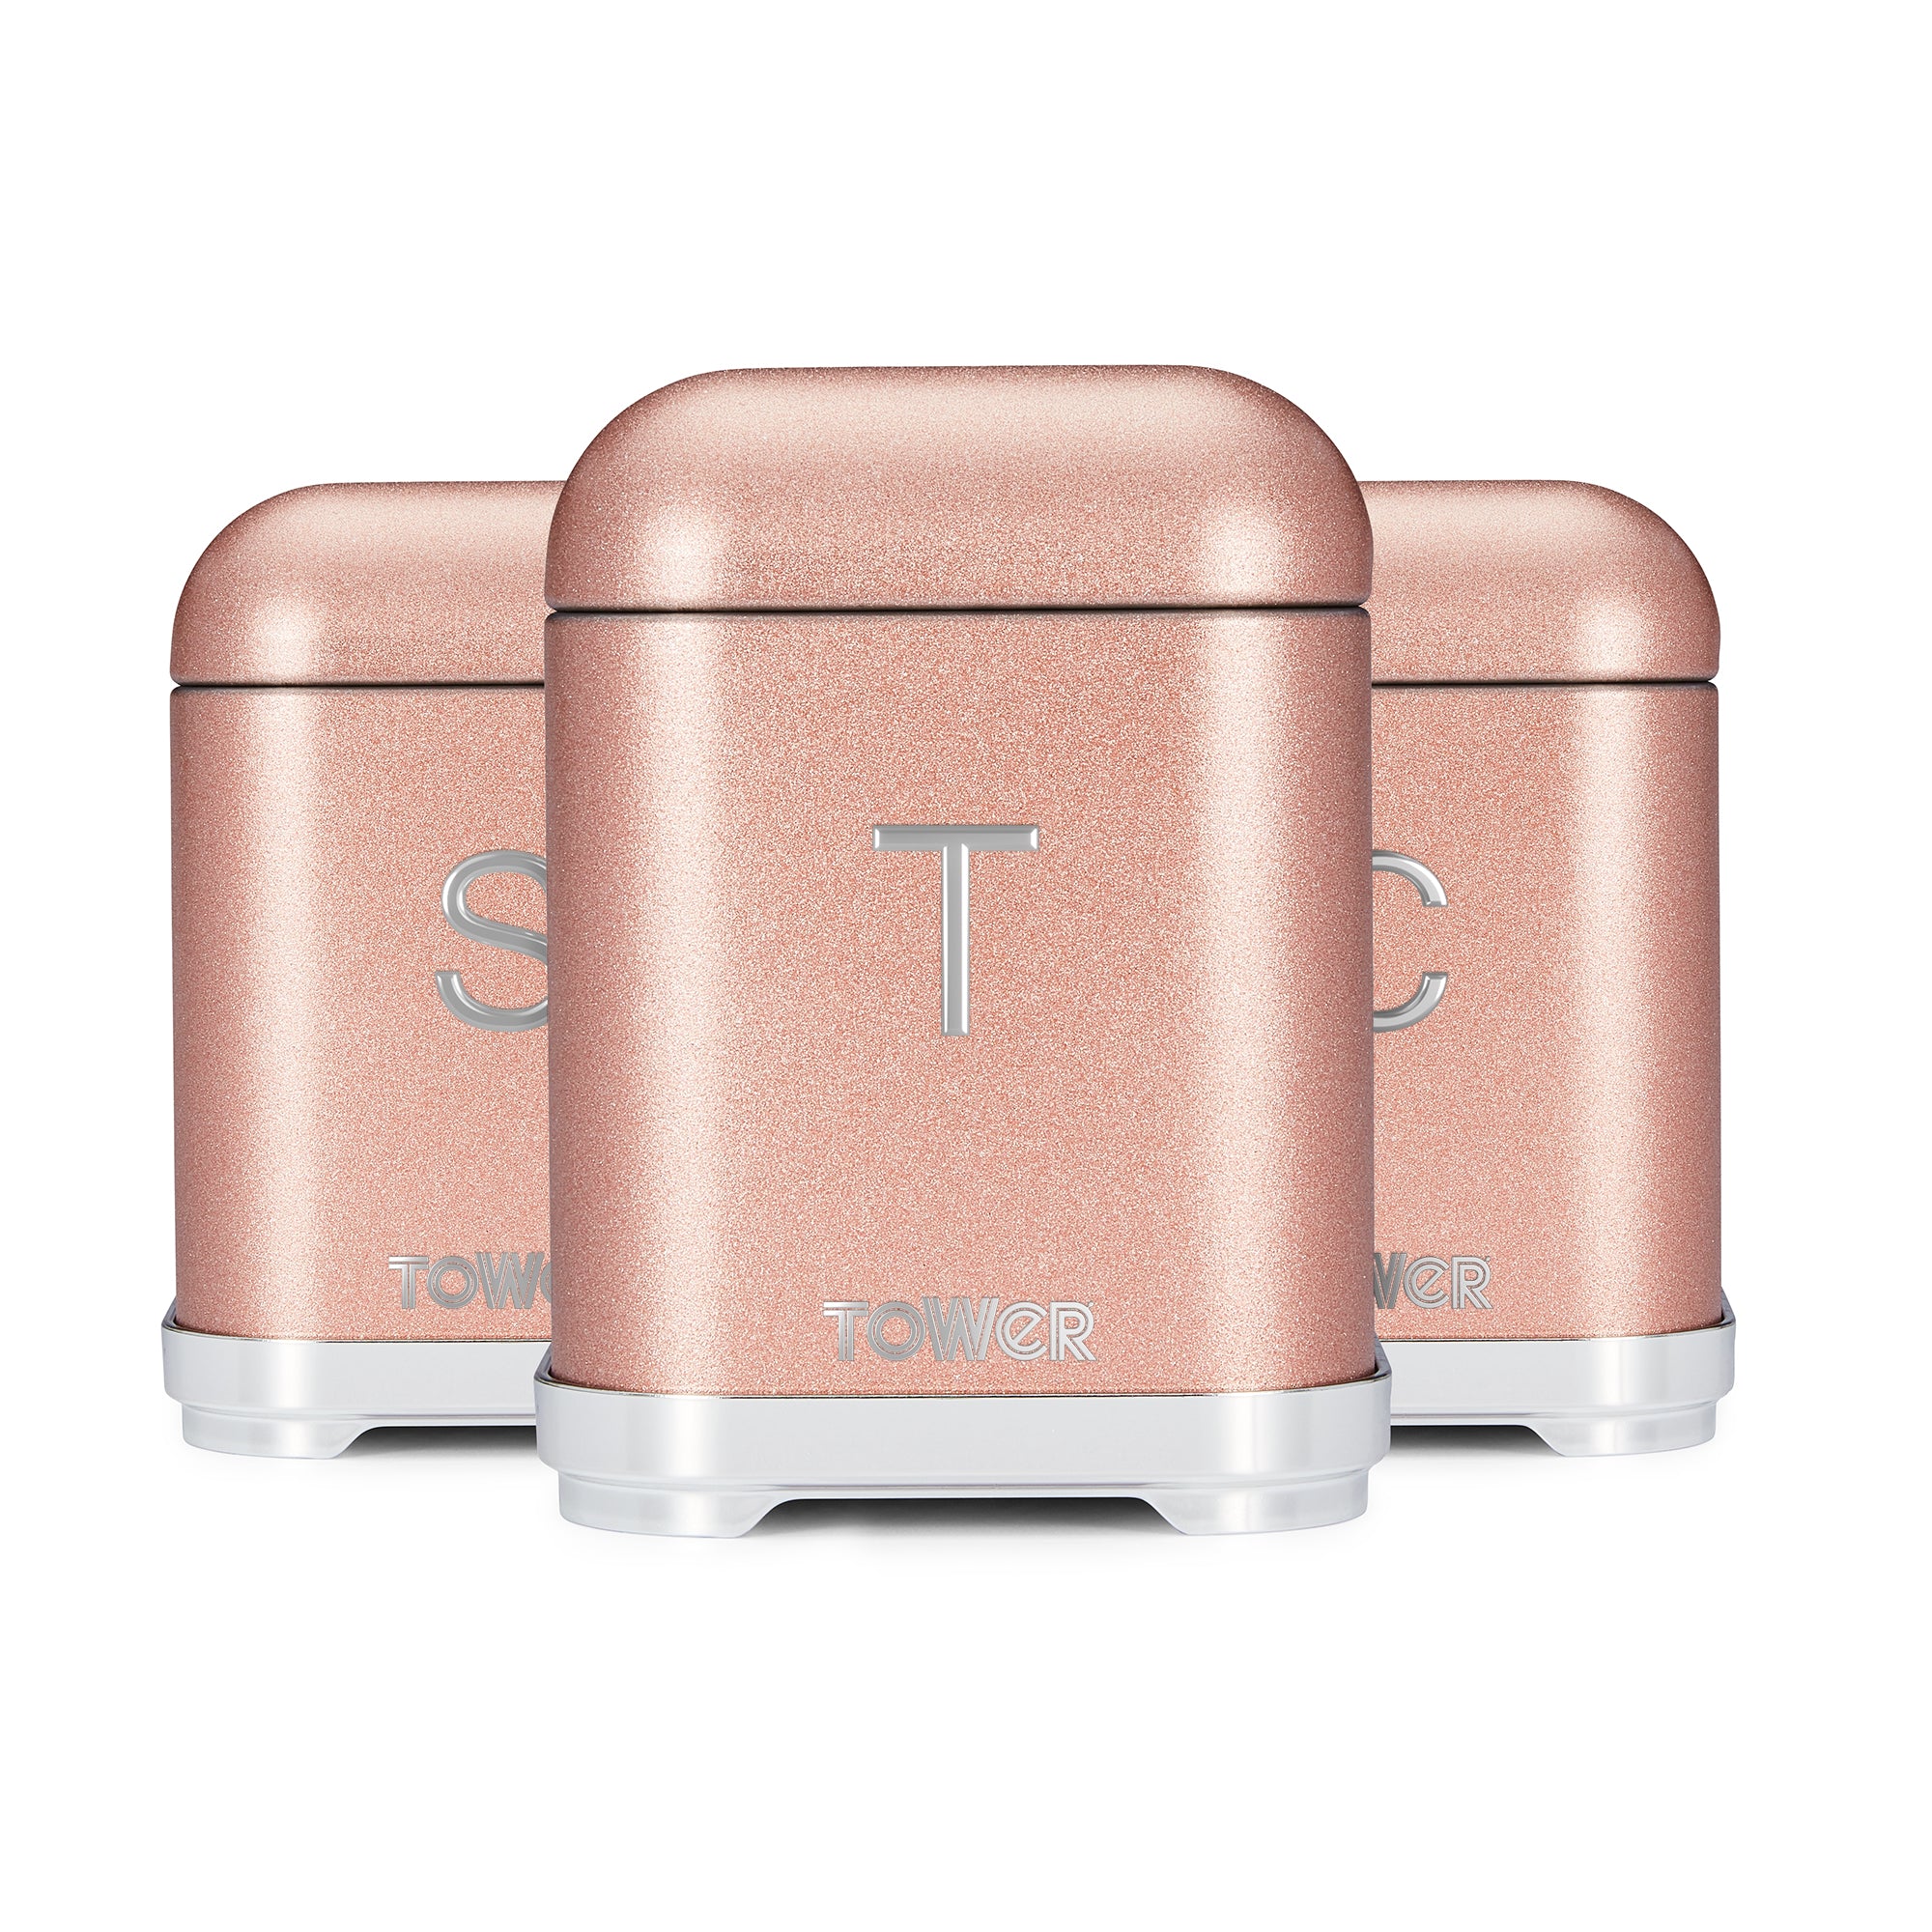 Tower Glitz Set of 3 Canisters - Blush Pink